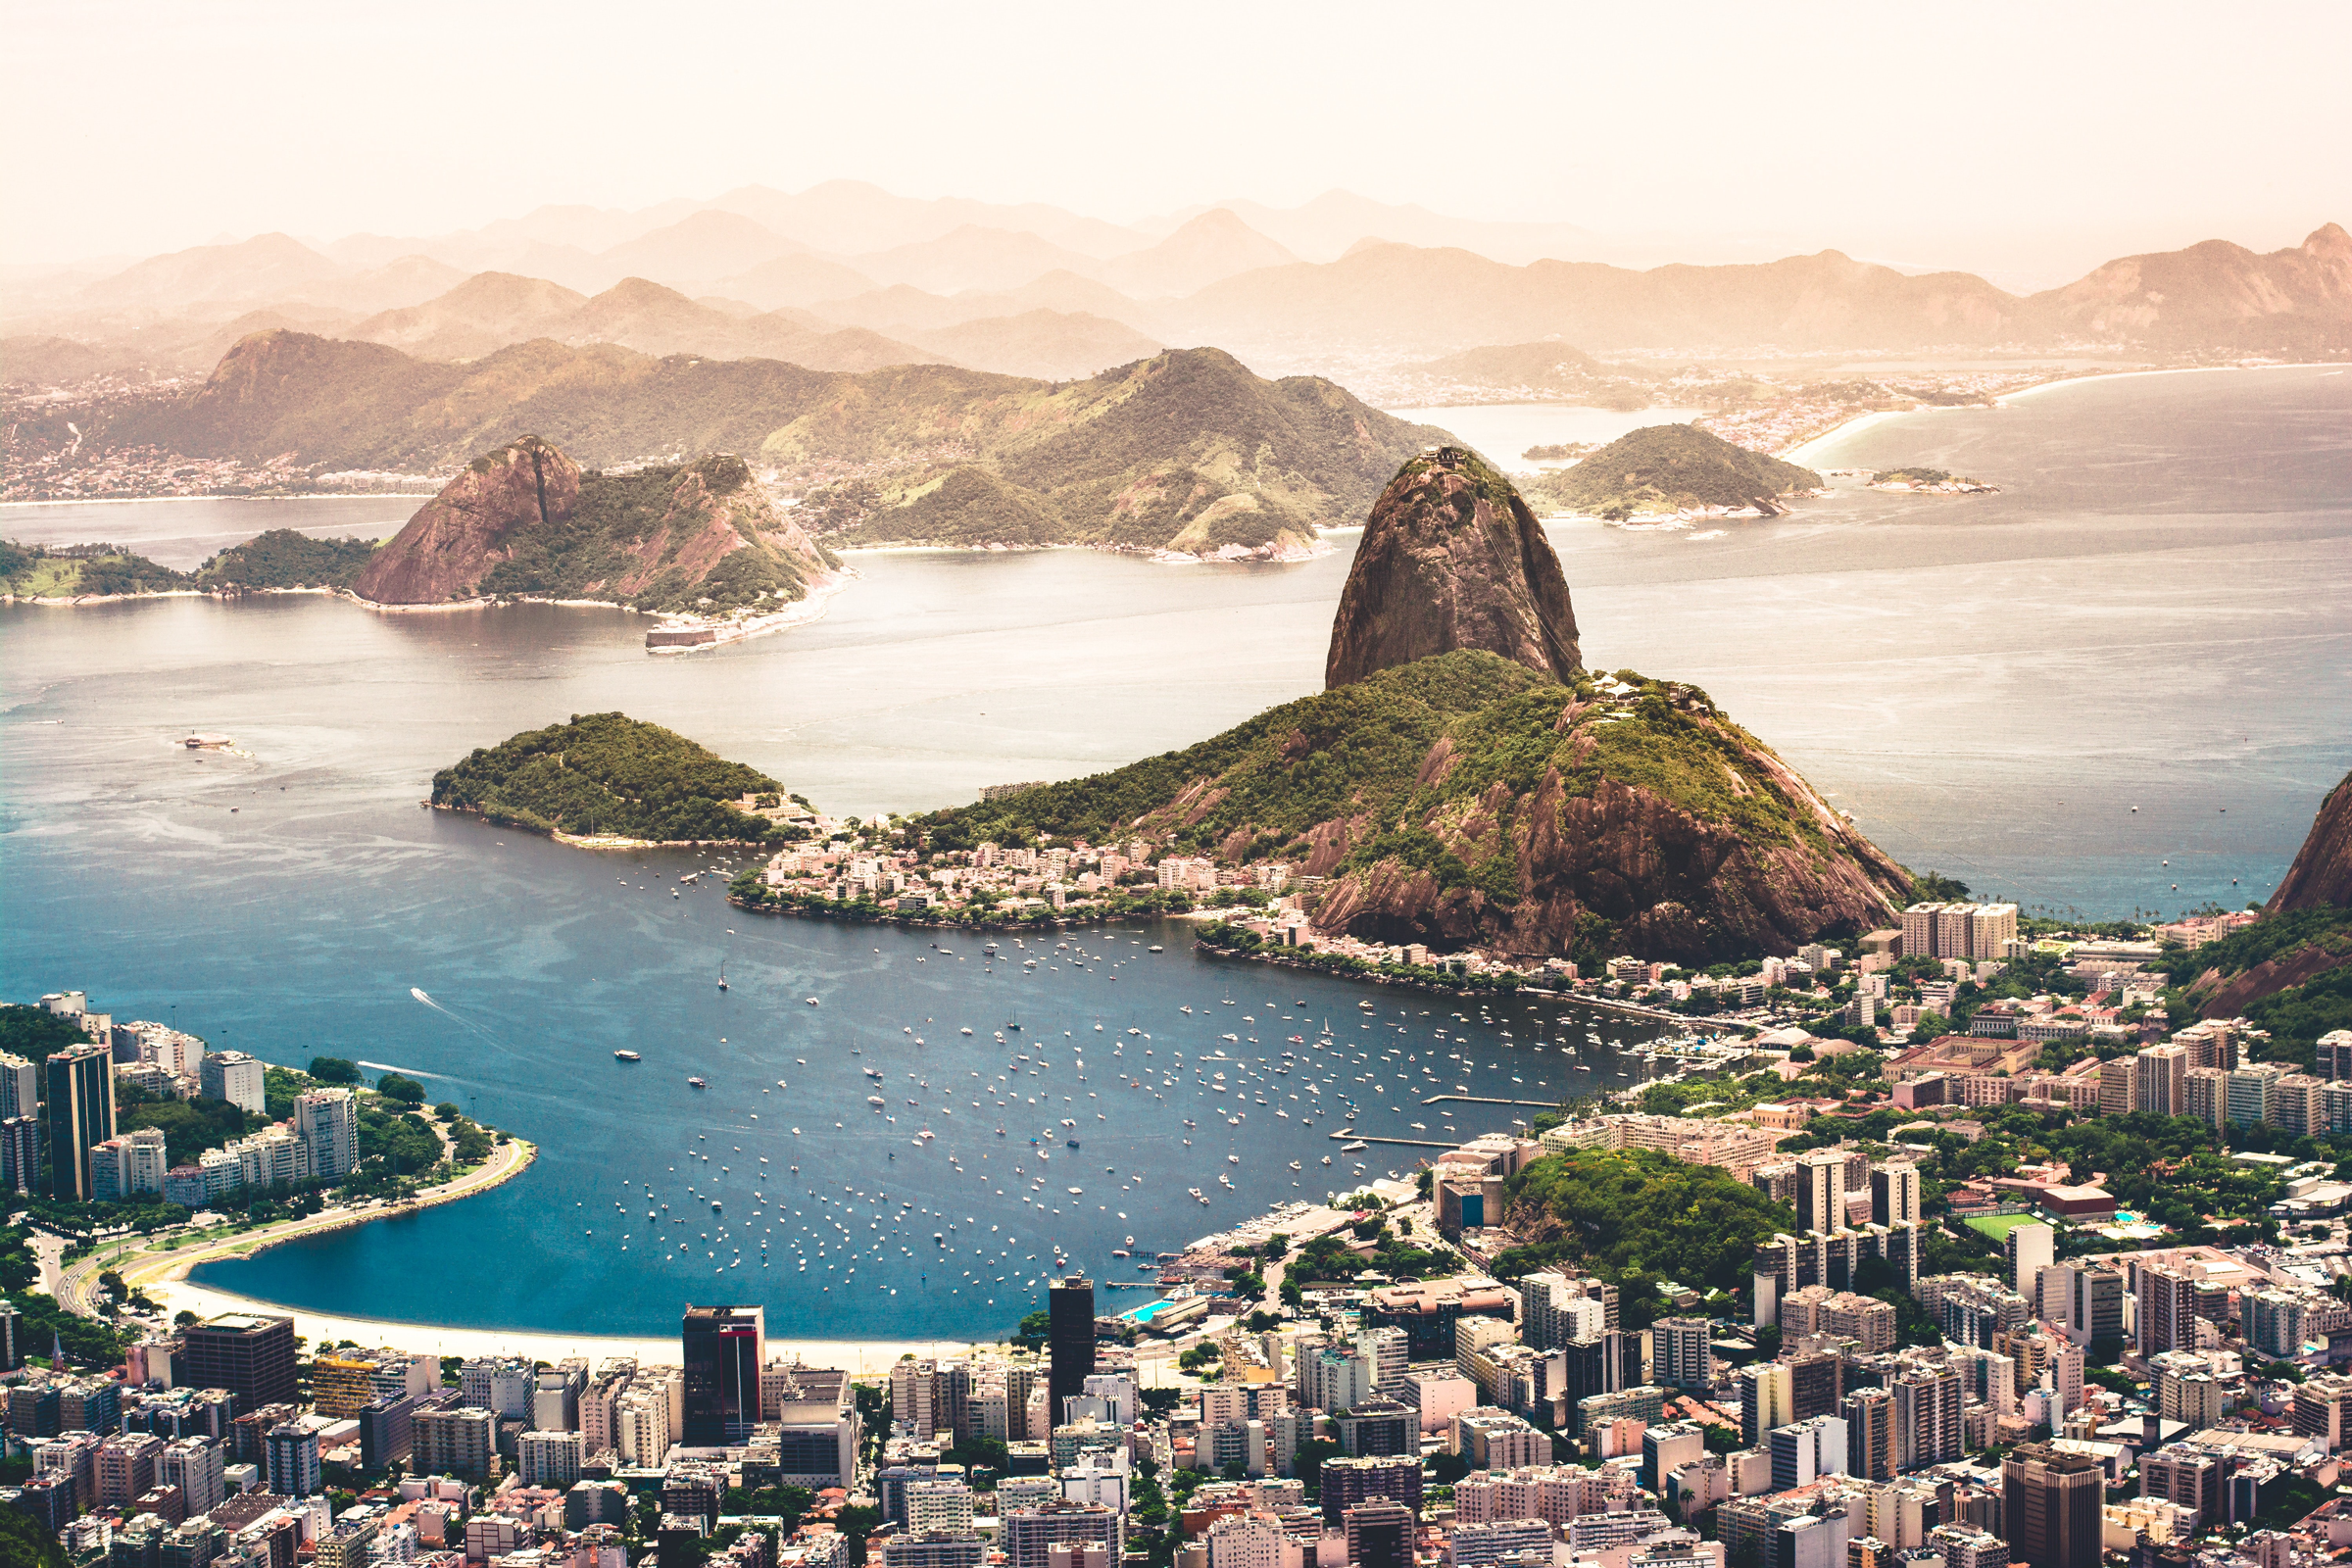 Safe travel Brazil today and explore travel security and duty of care solutions including intelligence gathering, private drivers, and more.